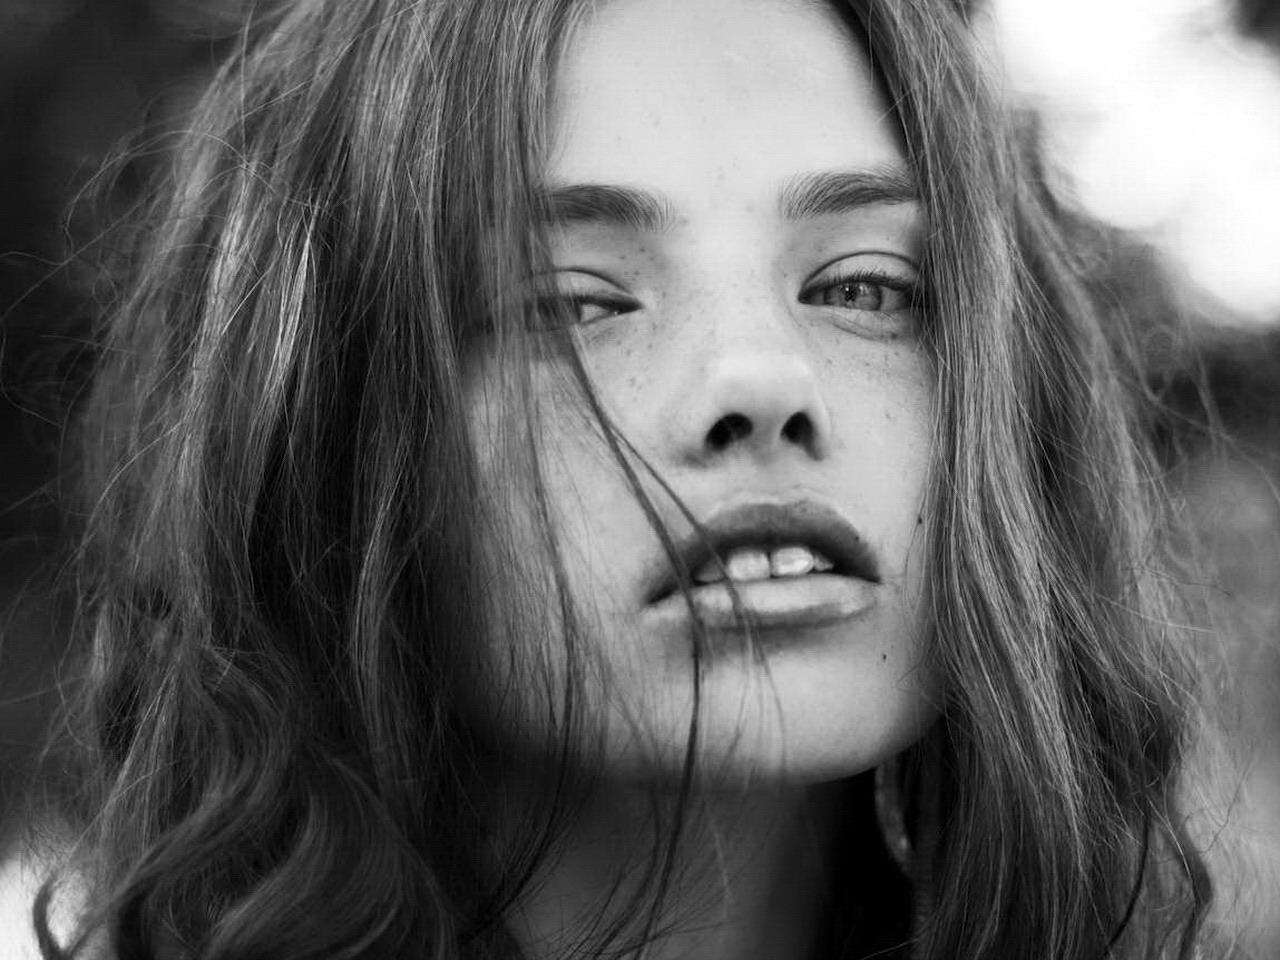 image about Kristine Froseth. See more about